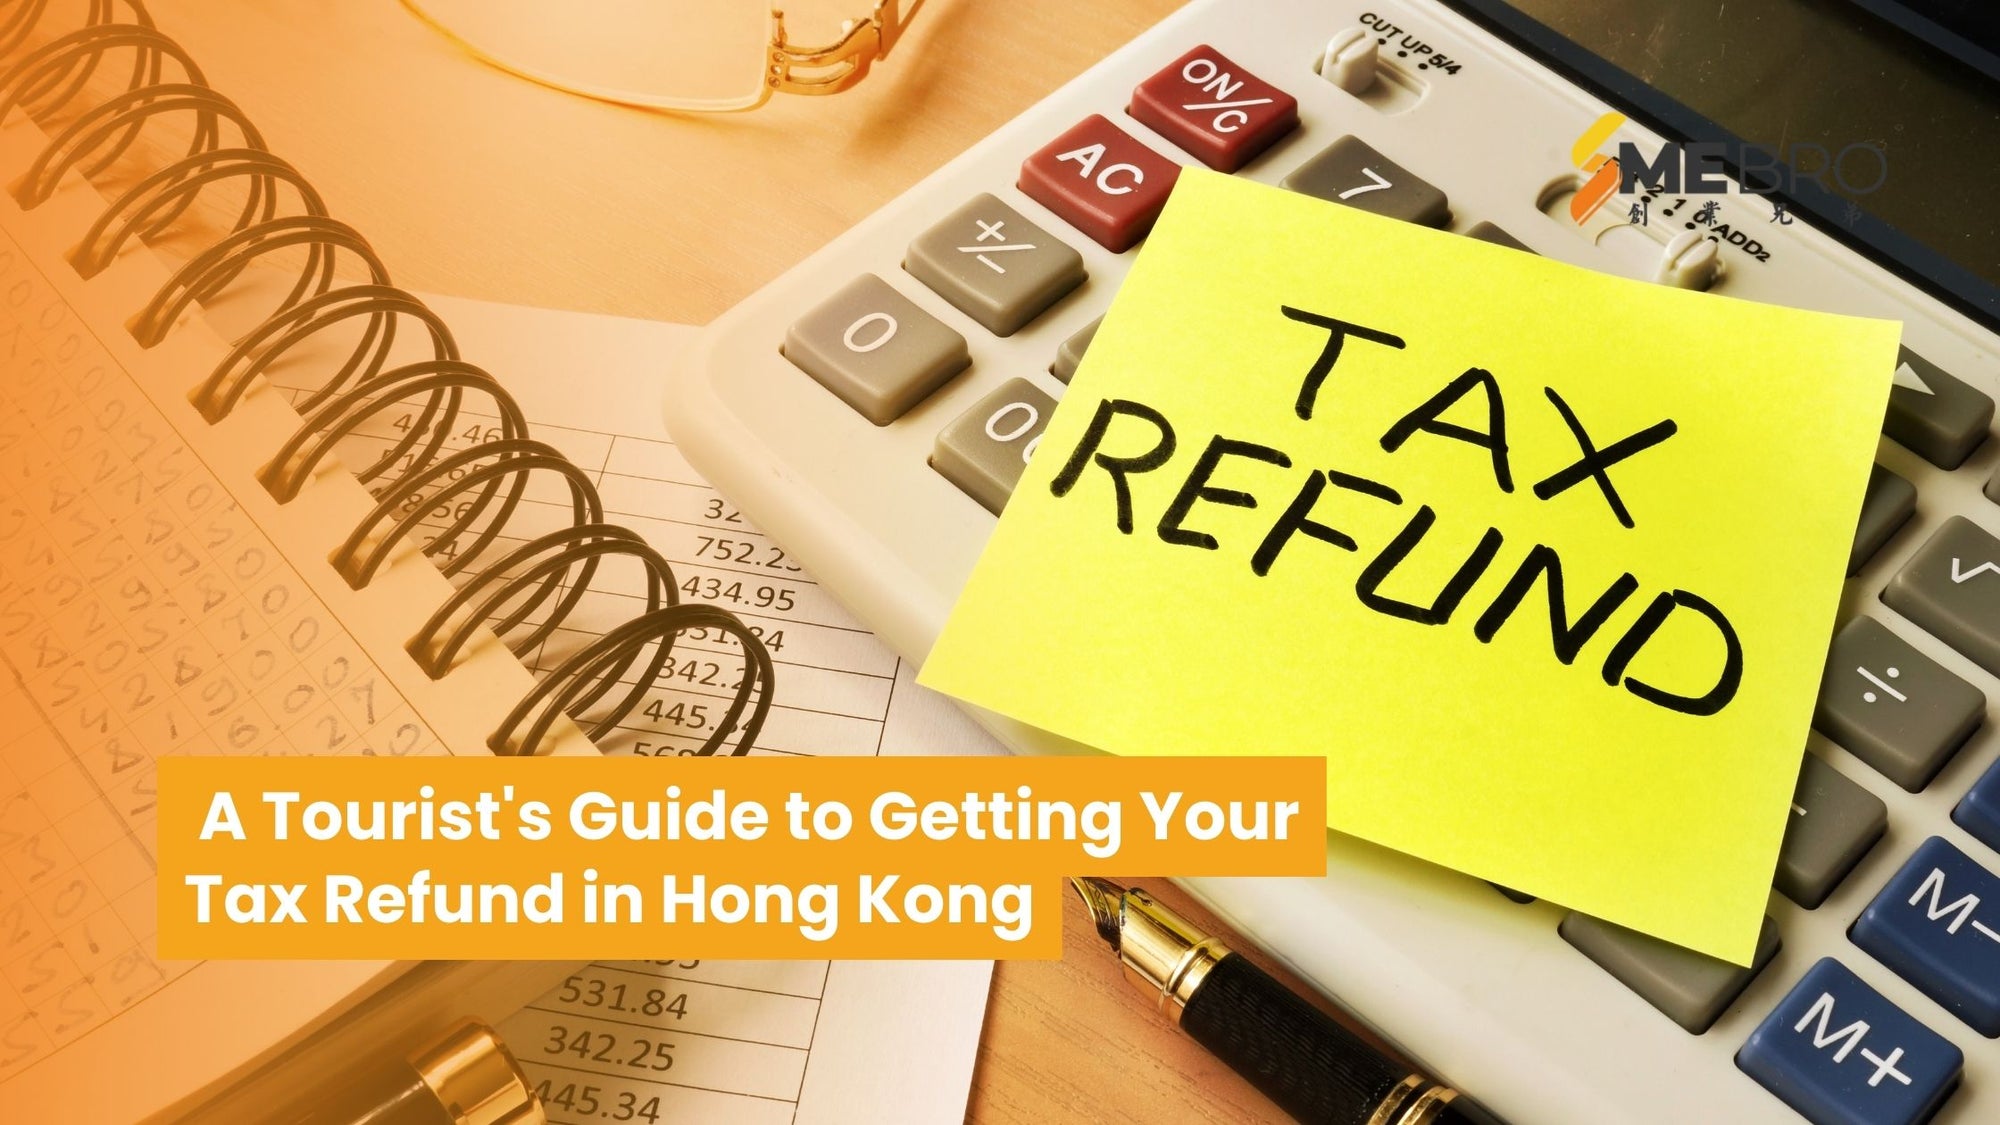 A Tourist's Guide to Getting Your Tax Refund in Hong Kong